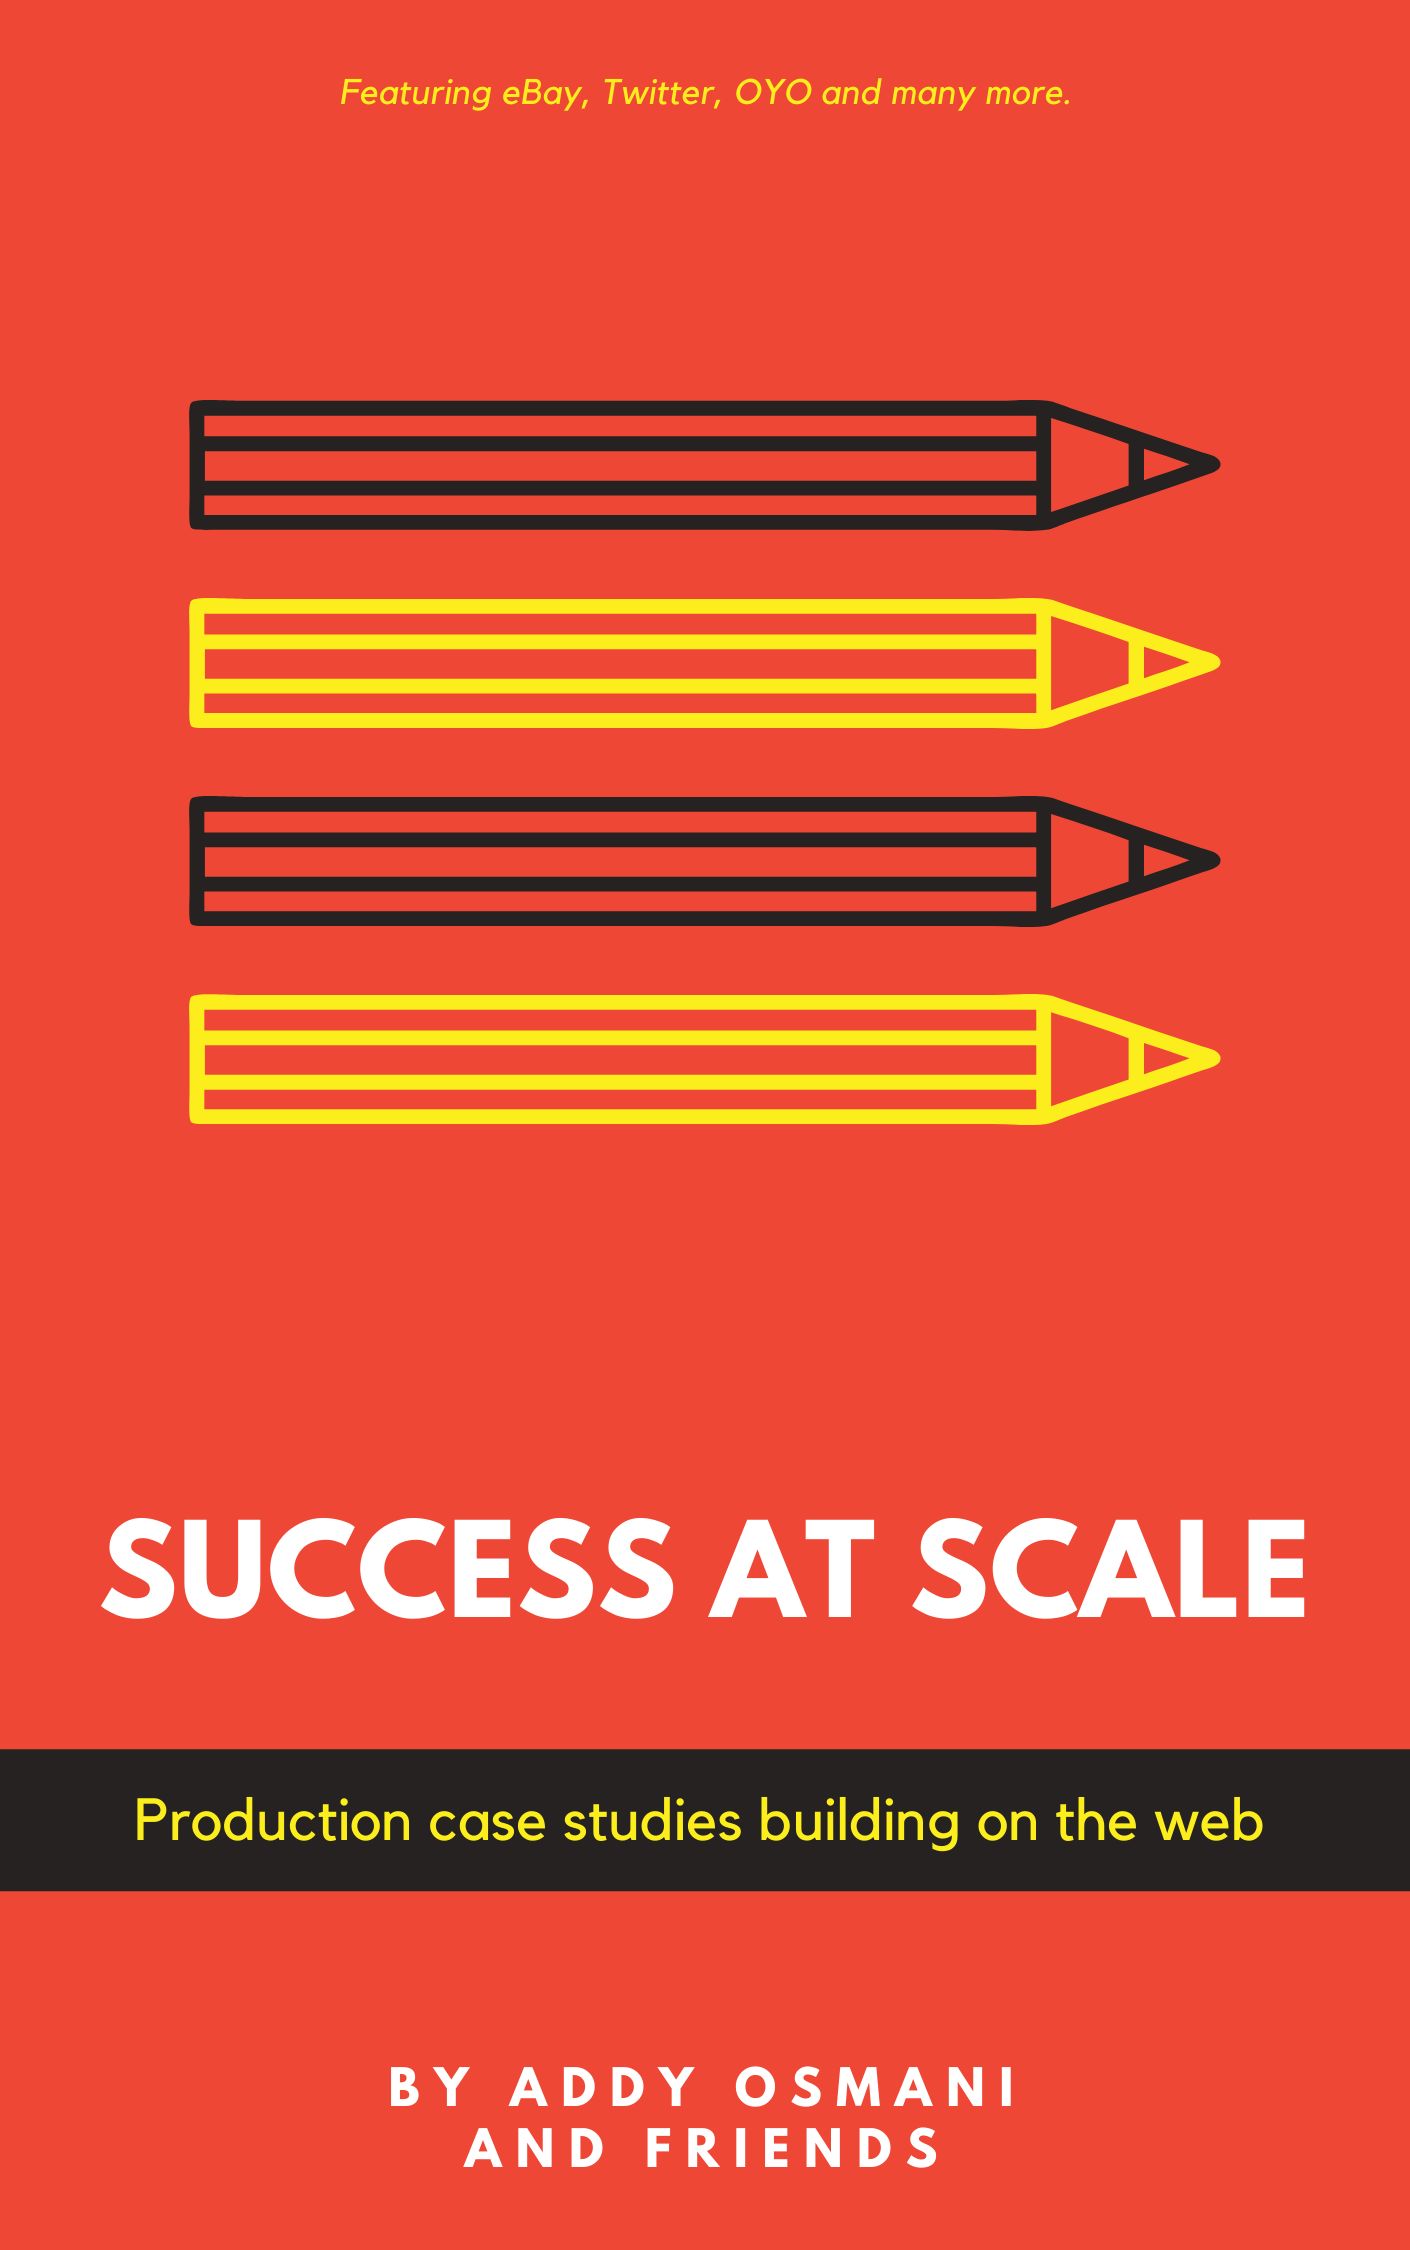 Success at scale - a book of technical production case studies from popular large sites by Addy Osmani and friends